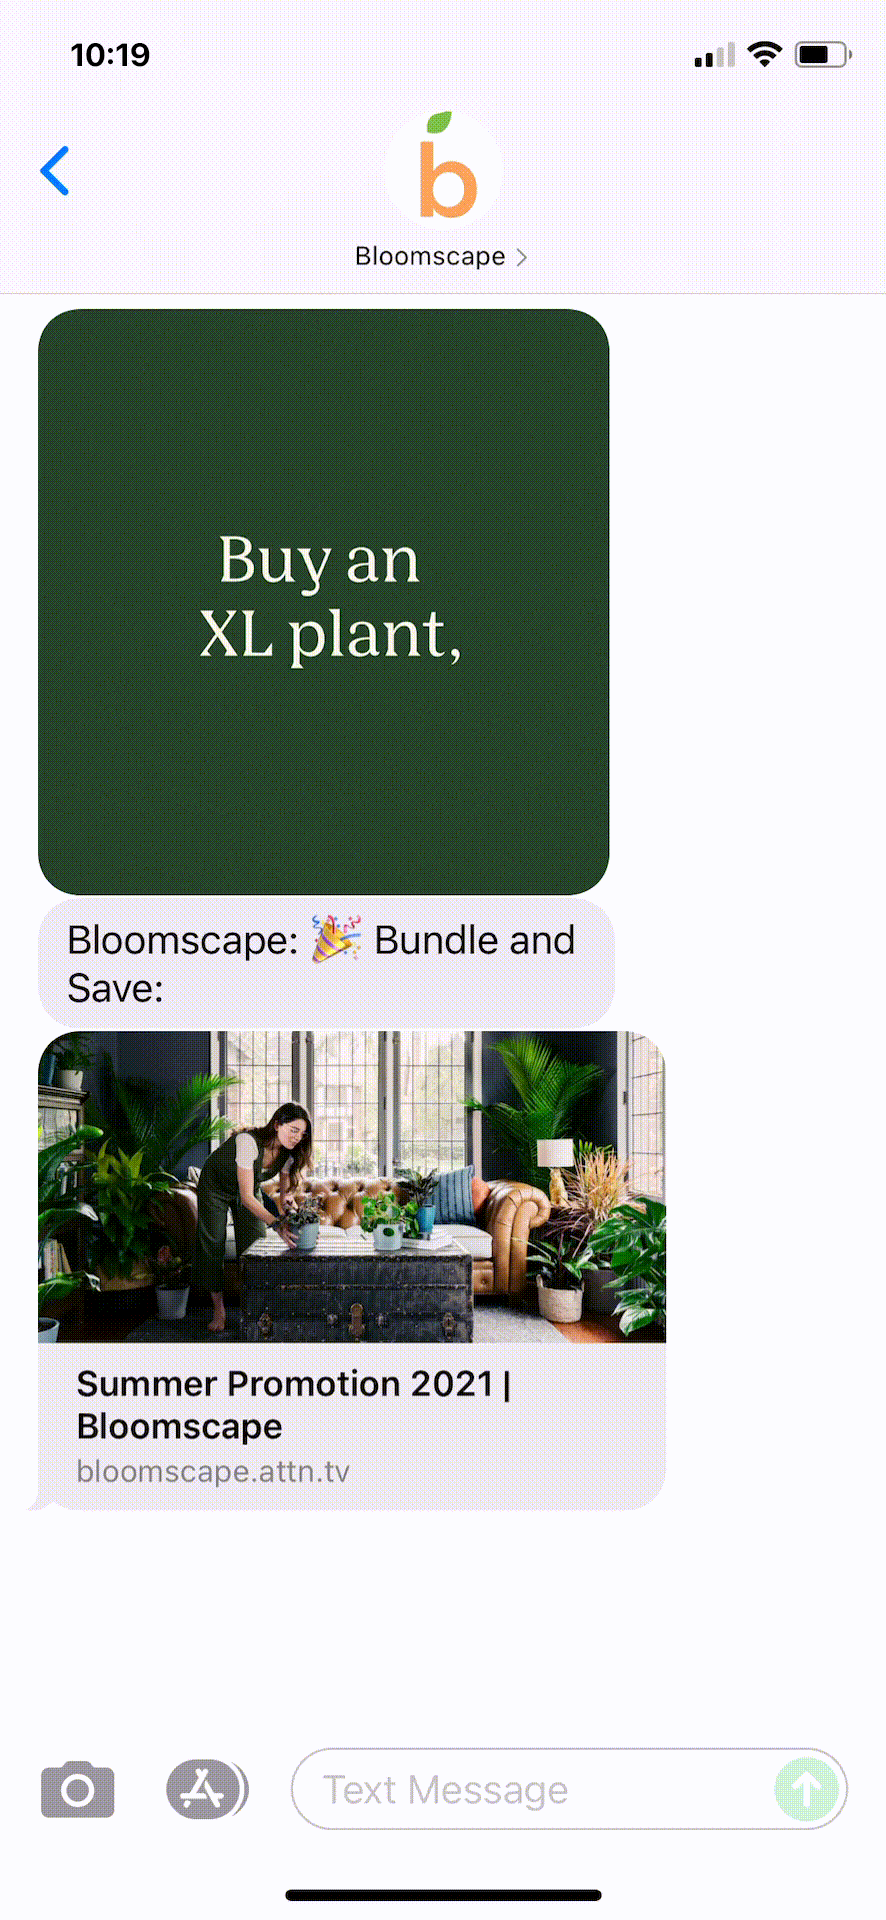 Bloomscape-Text-Message-Marketing-Example-06.15.2021